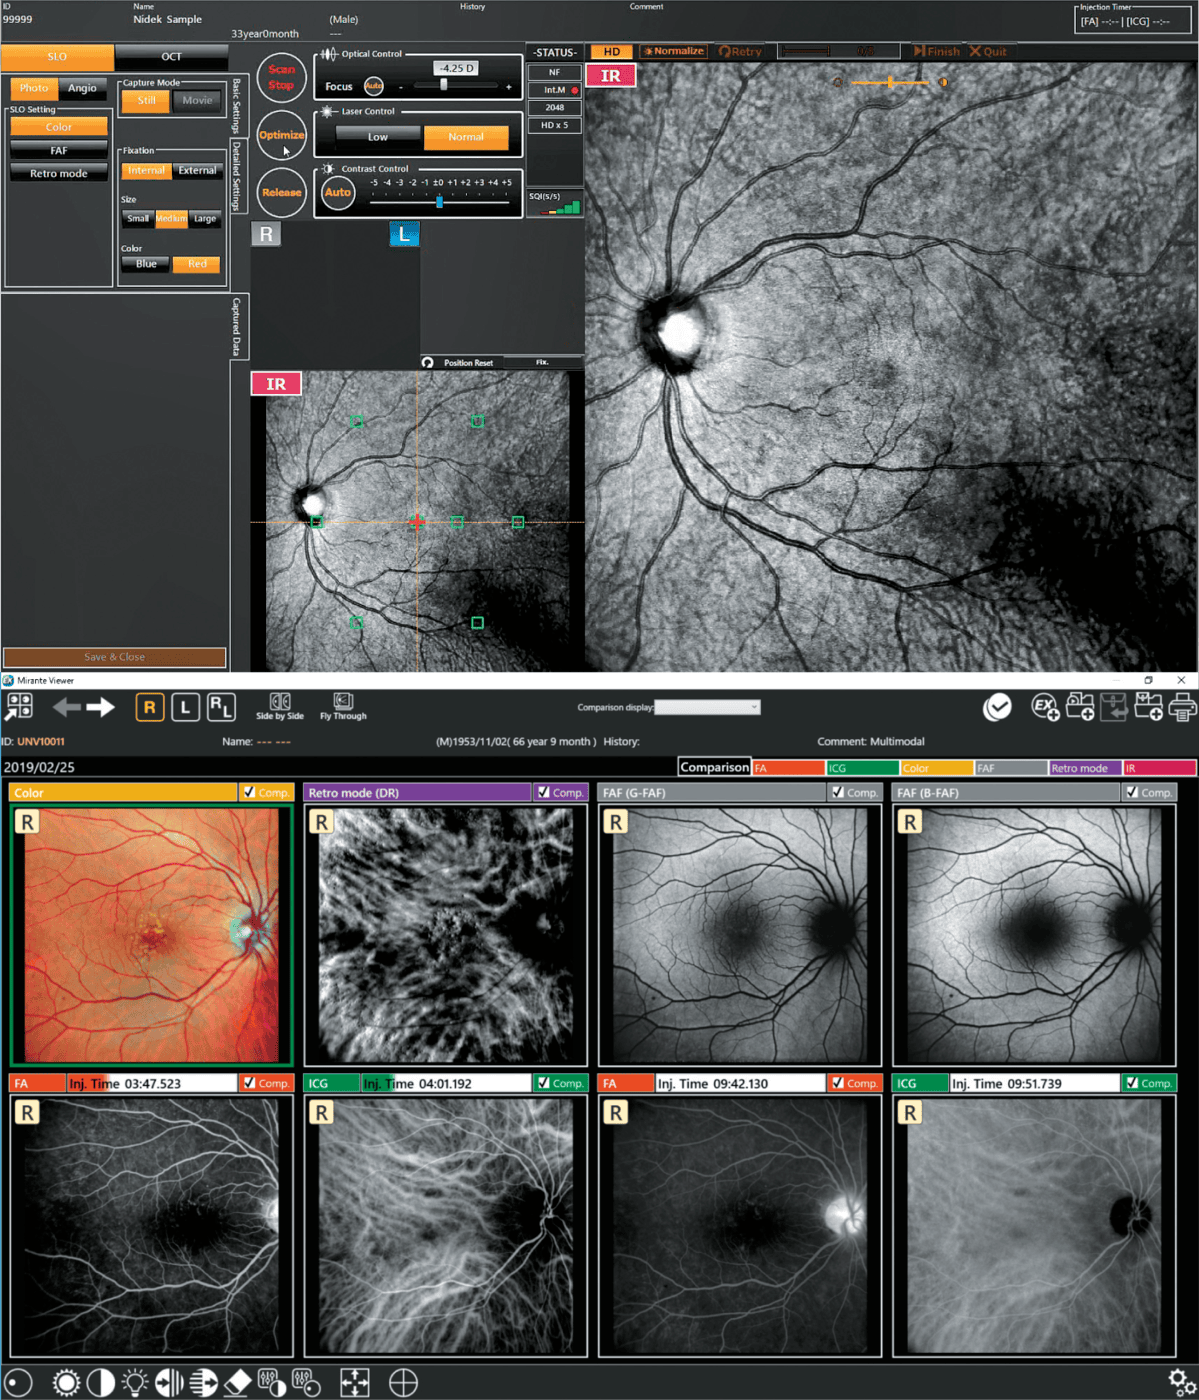 Medical Imaging Software From Nidek Displaying Detailed Retinal Scans. The Interface Contains Various Tools, Settings, And A Series Of Nine Detailed Images Showing Different Views Of The Retina, Highlighting Veins And Macula.